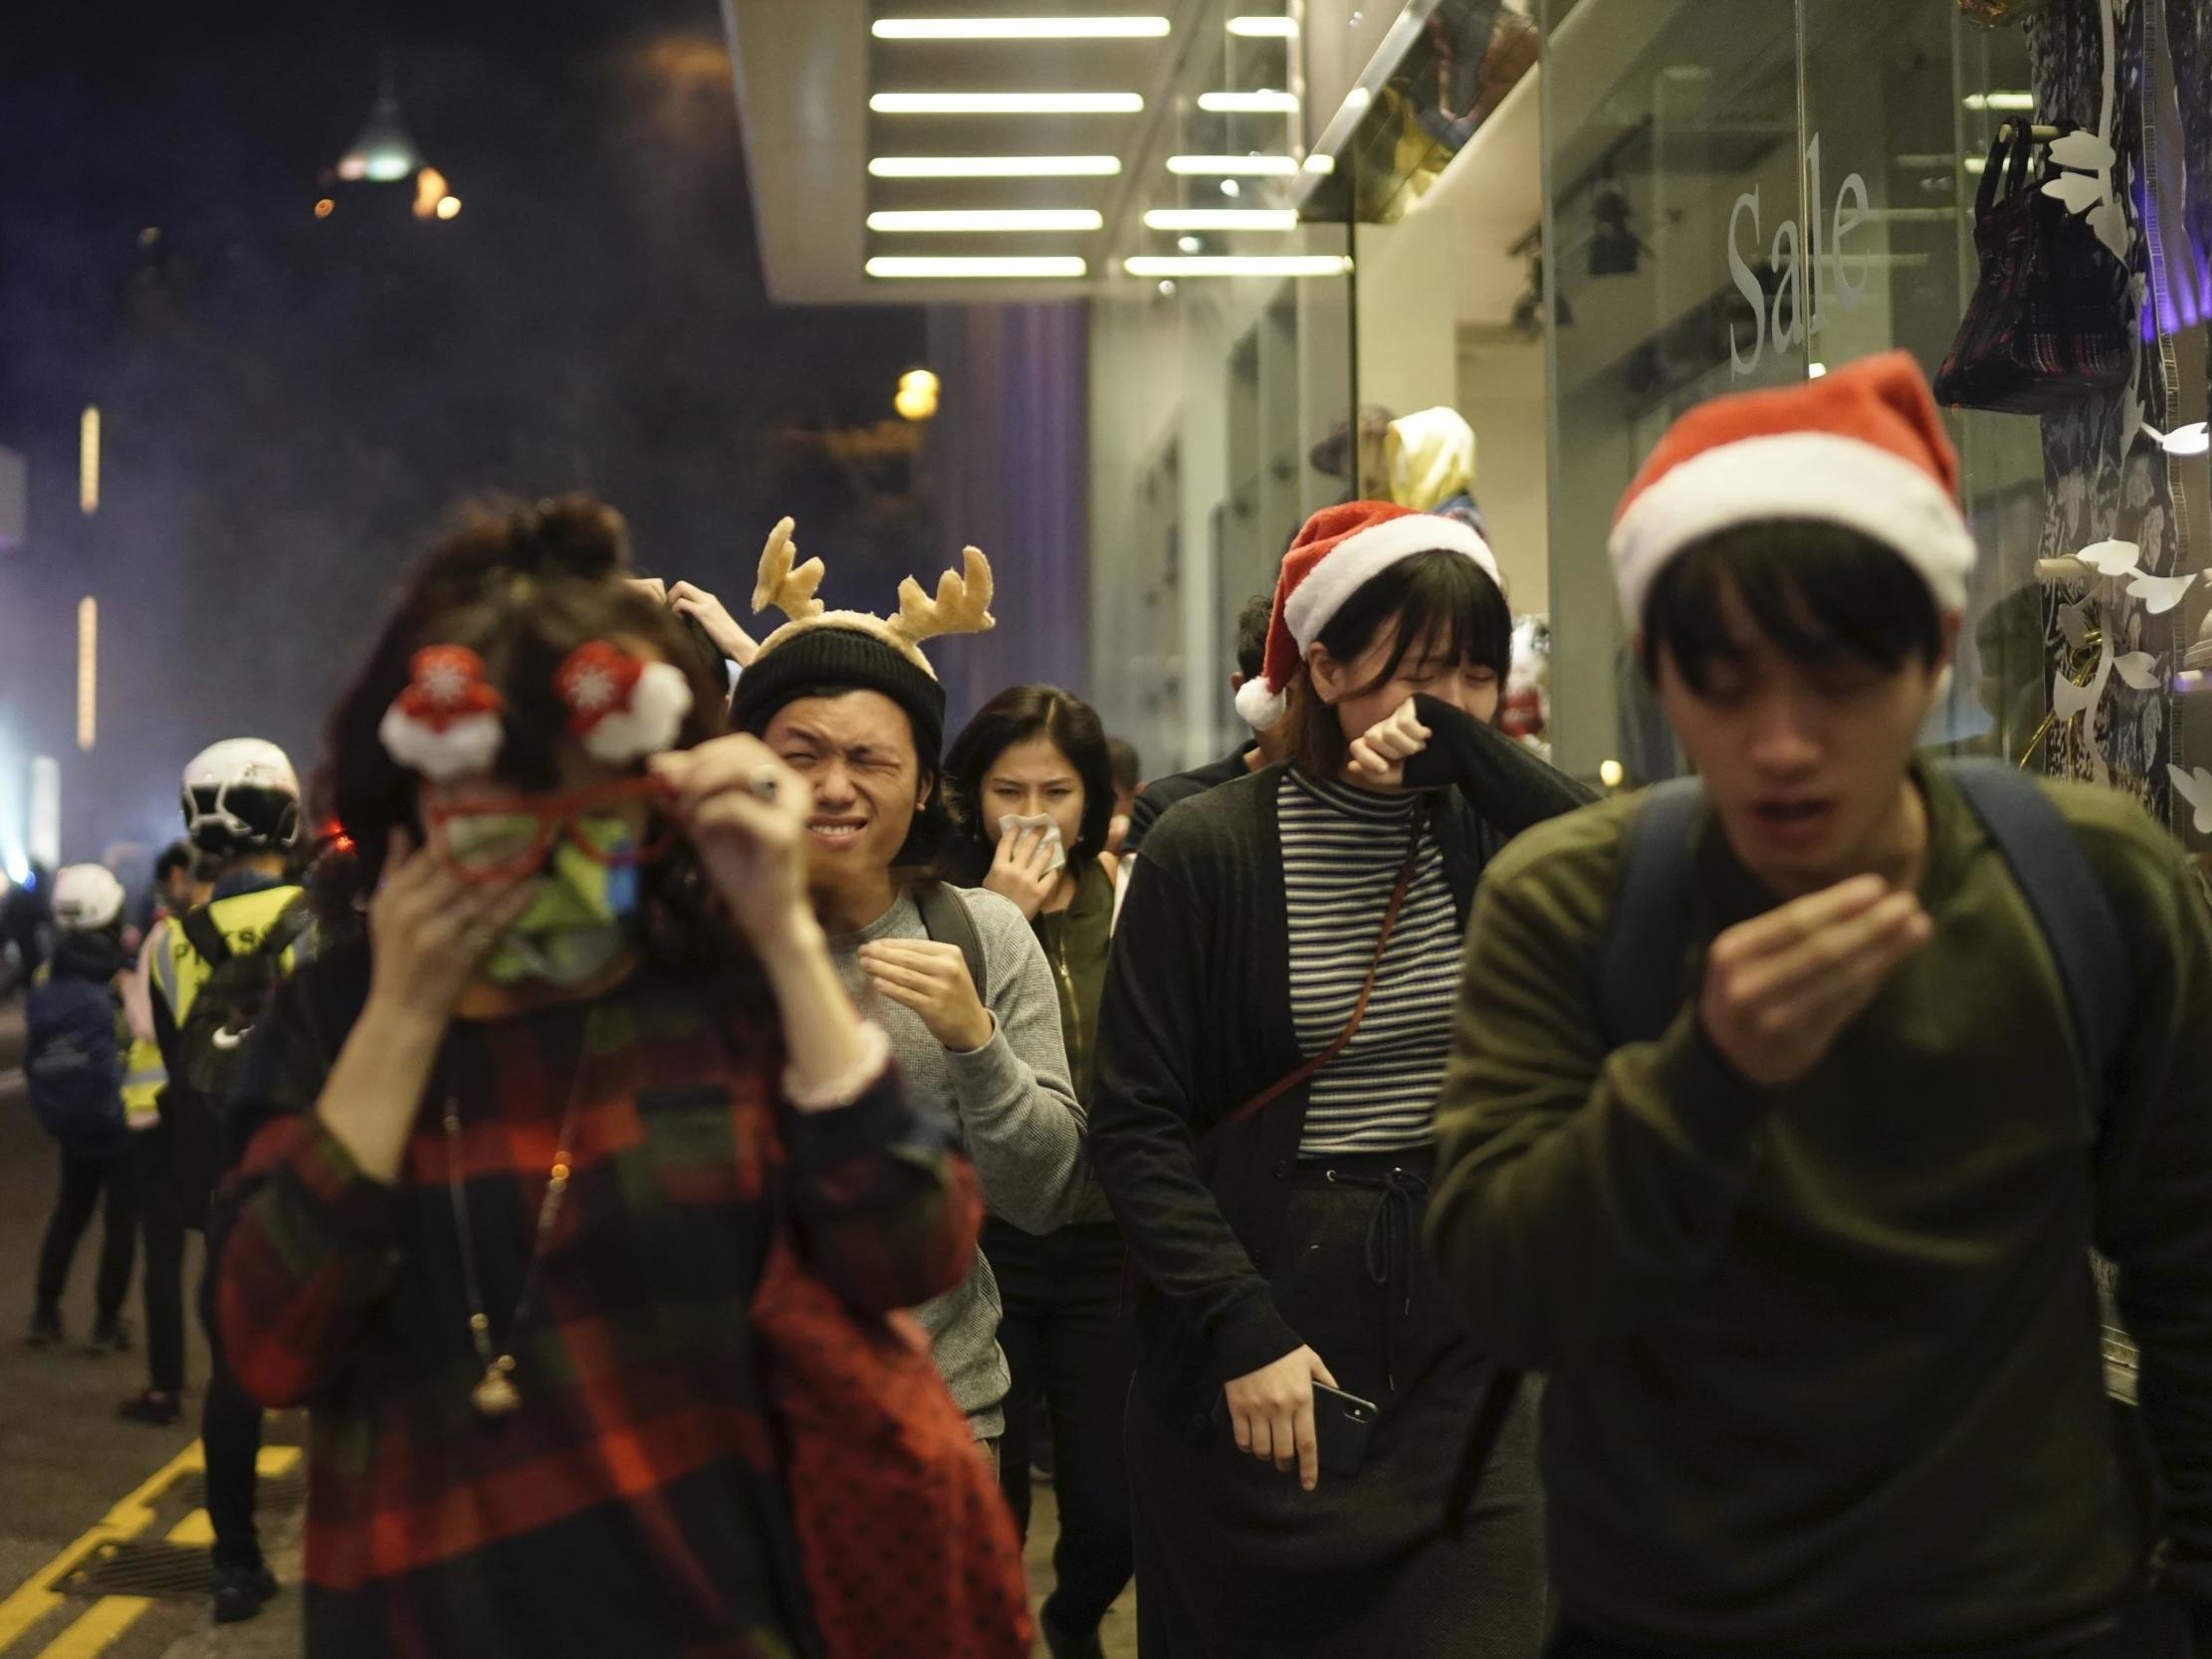 Residents dressed for Christmas festivities react to tear gas as police confront protesters on Christmas Eve in Hong Kong